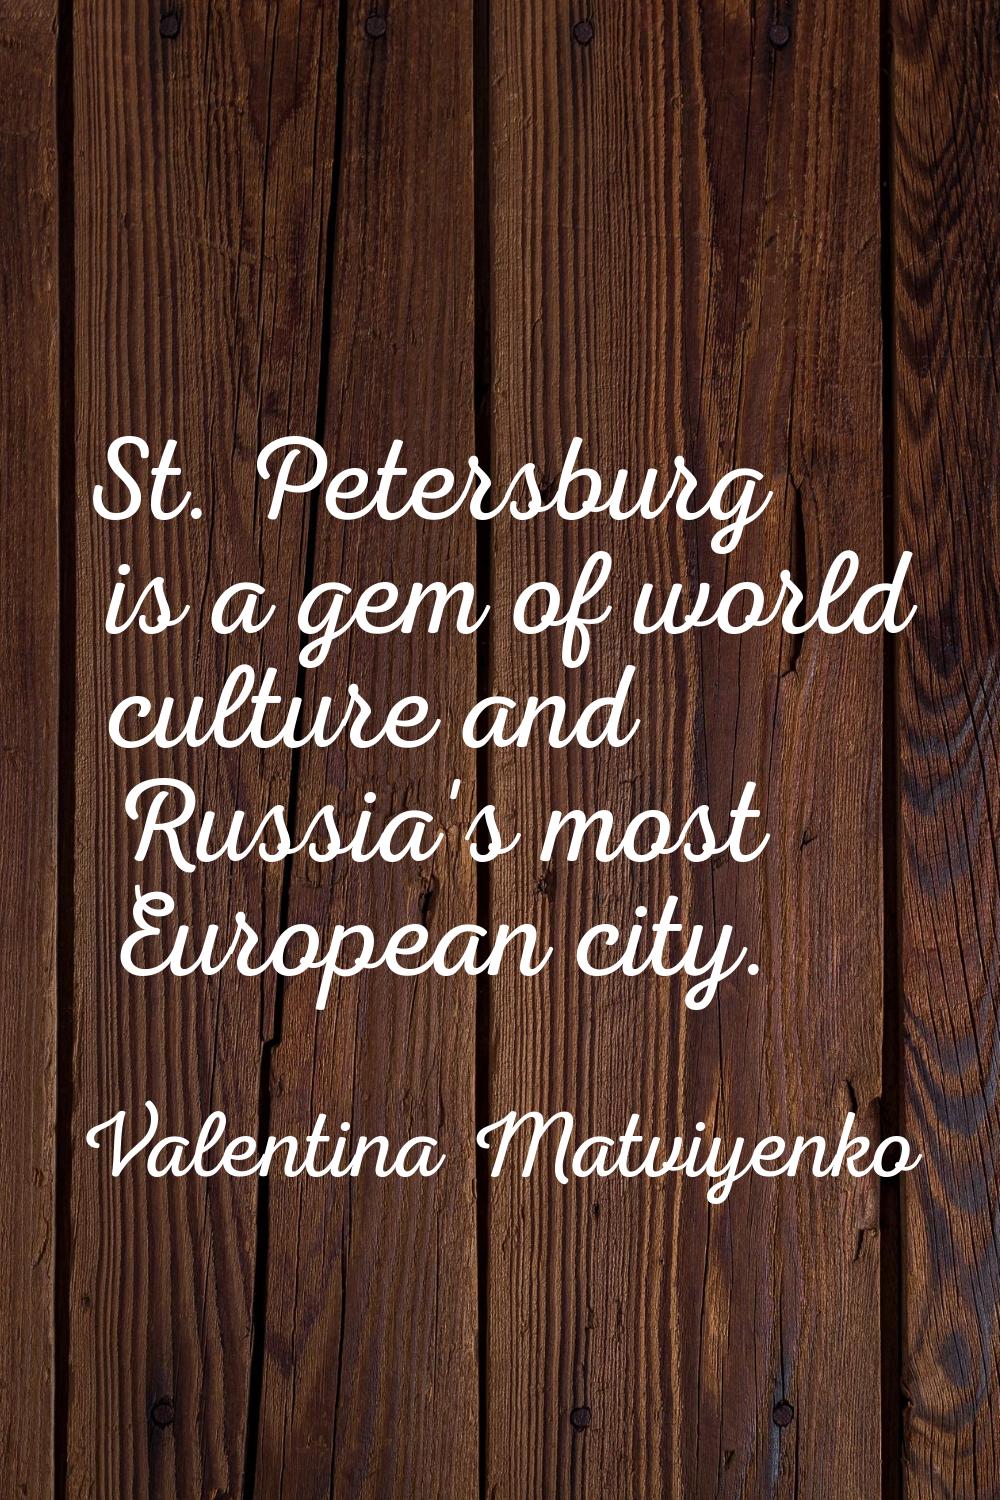 St. Petersburg is a gem of world culture and Russia's most European city.